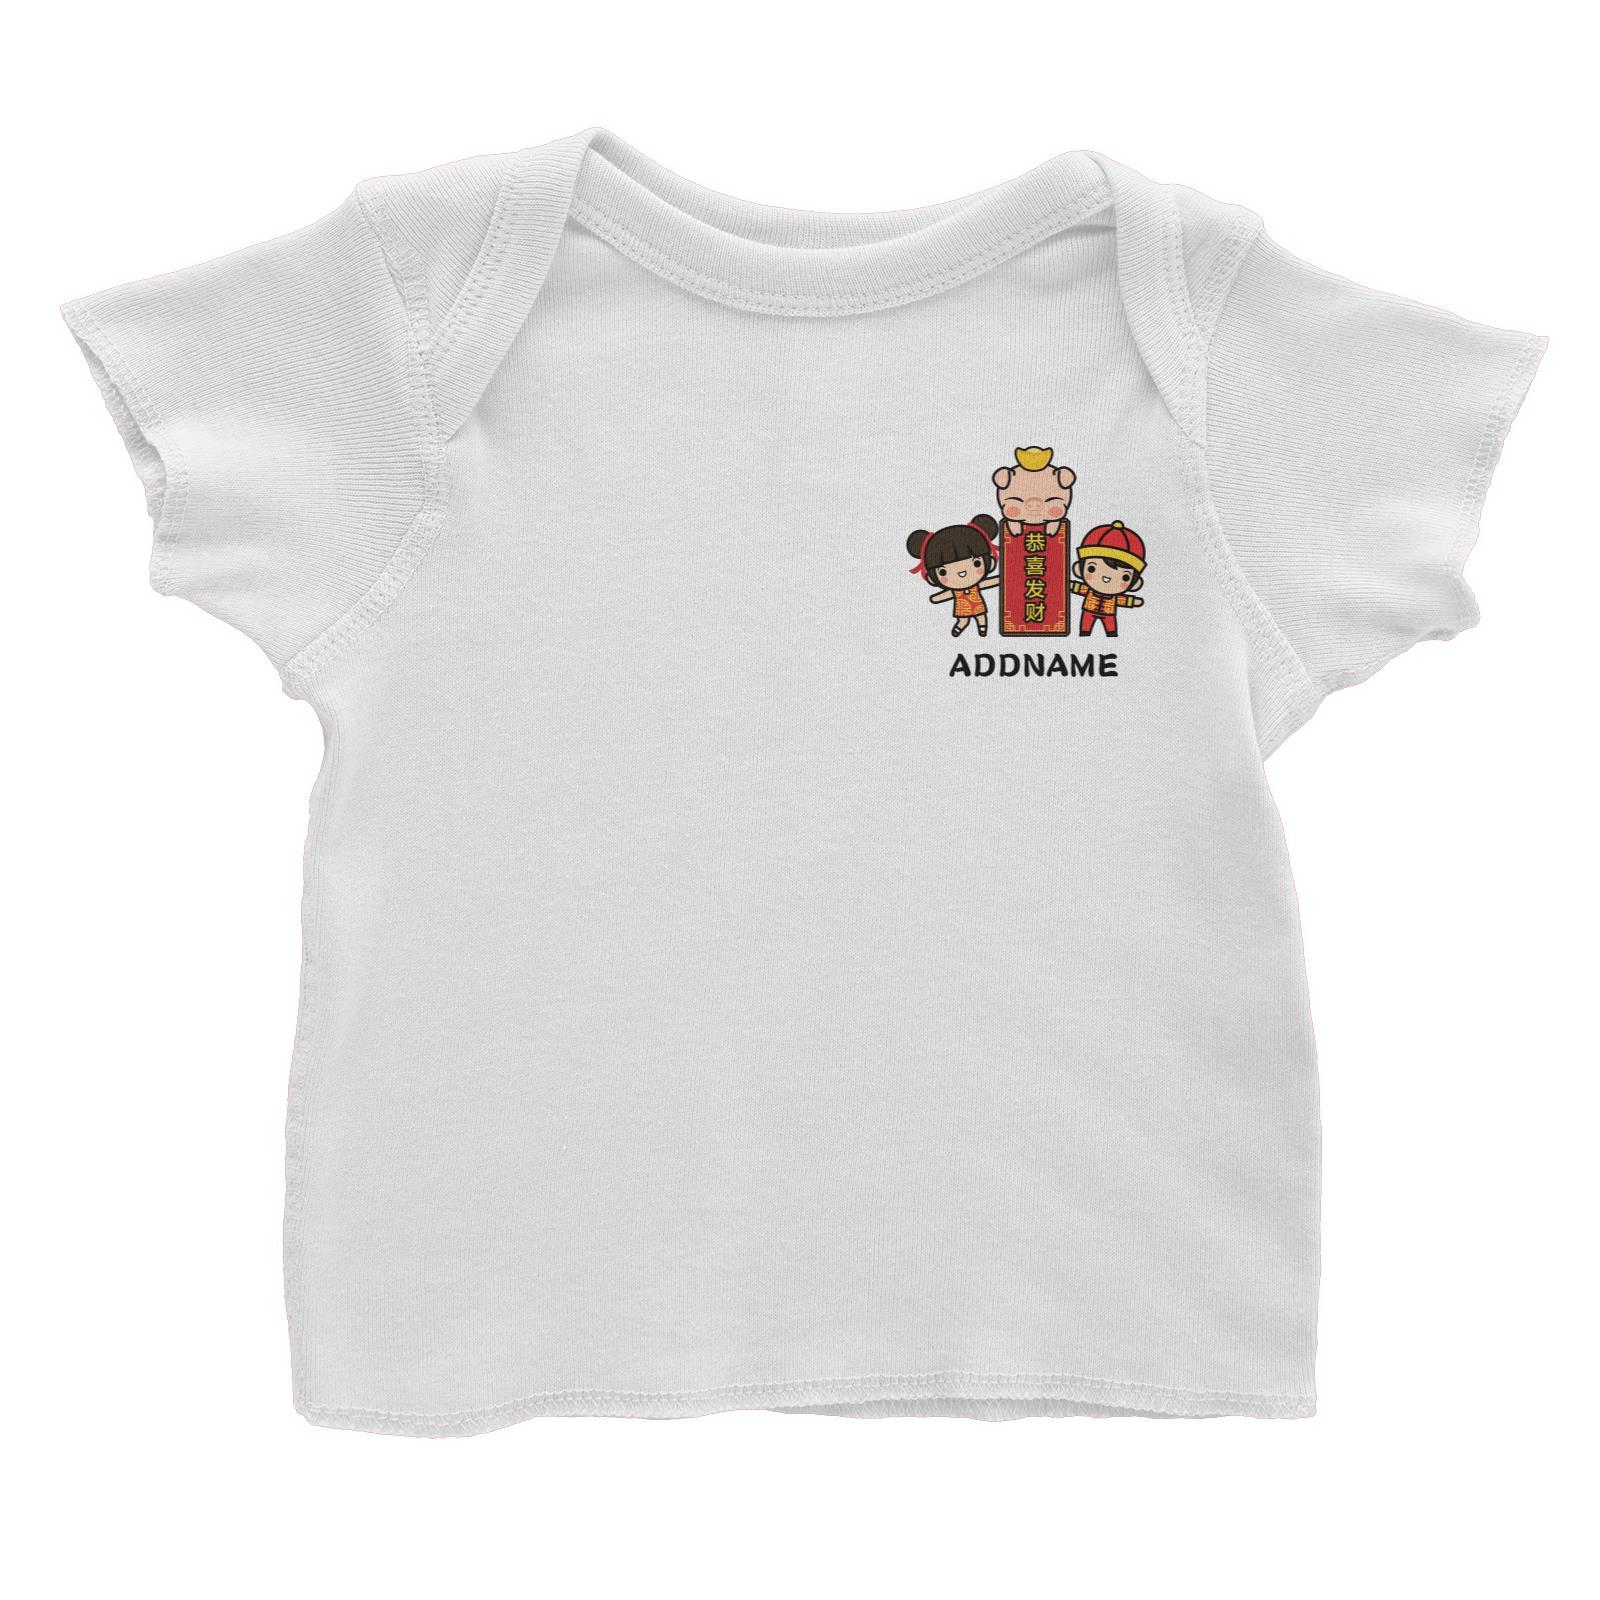 Prosperity Pig Boy, Girl and Baby Pig with Gold and Signage Pocket Design Baby T-Shirt